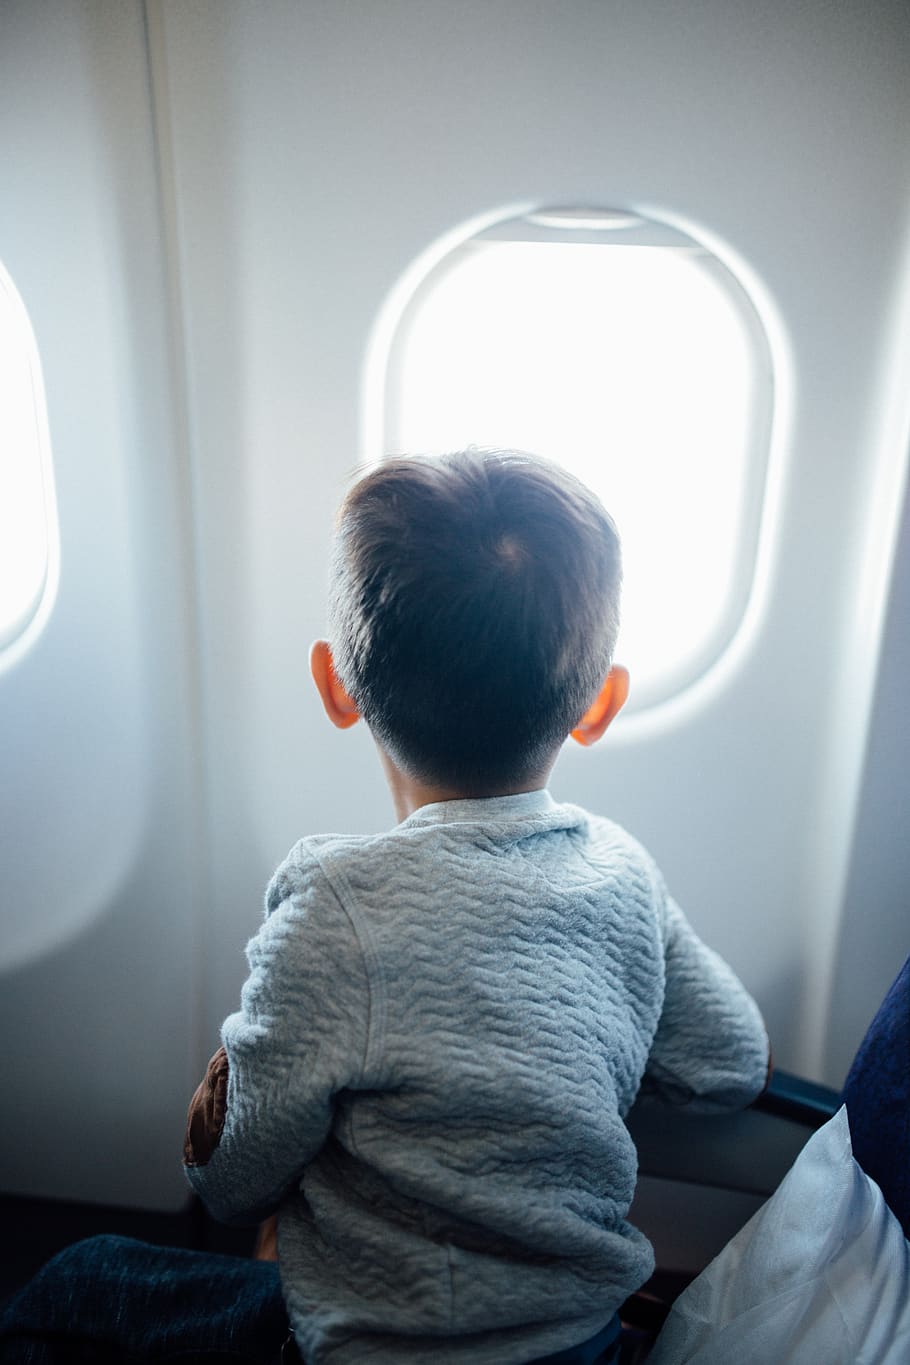 HD wallpaper: boy sitting on plane seat while viewing window, human, person  | Wallpaper Flare